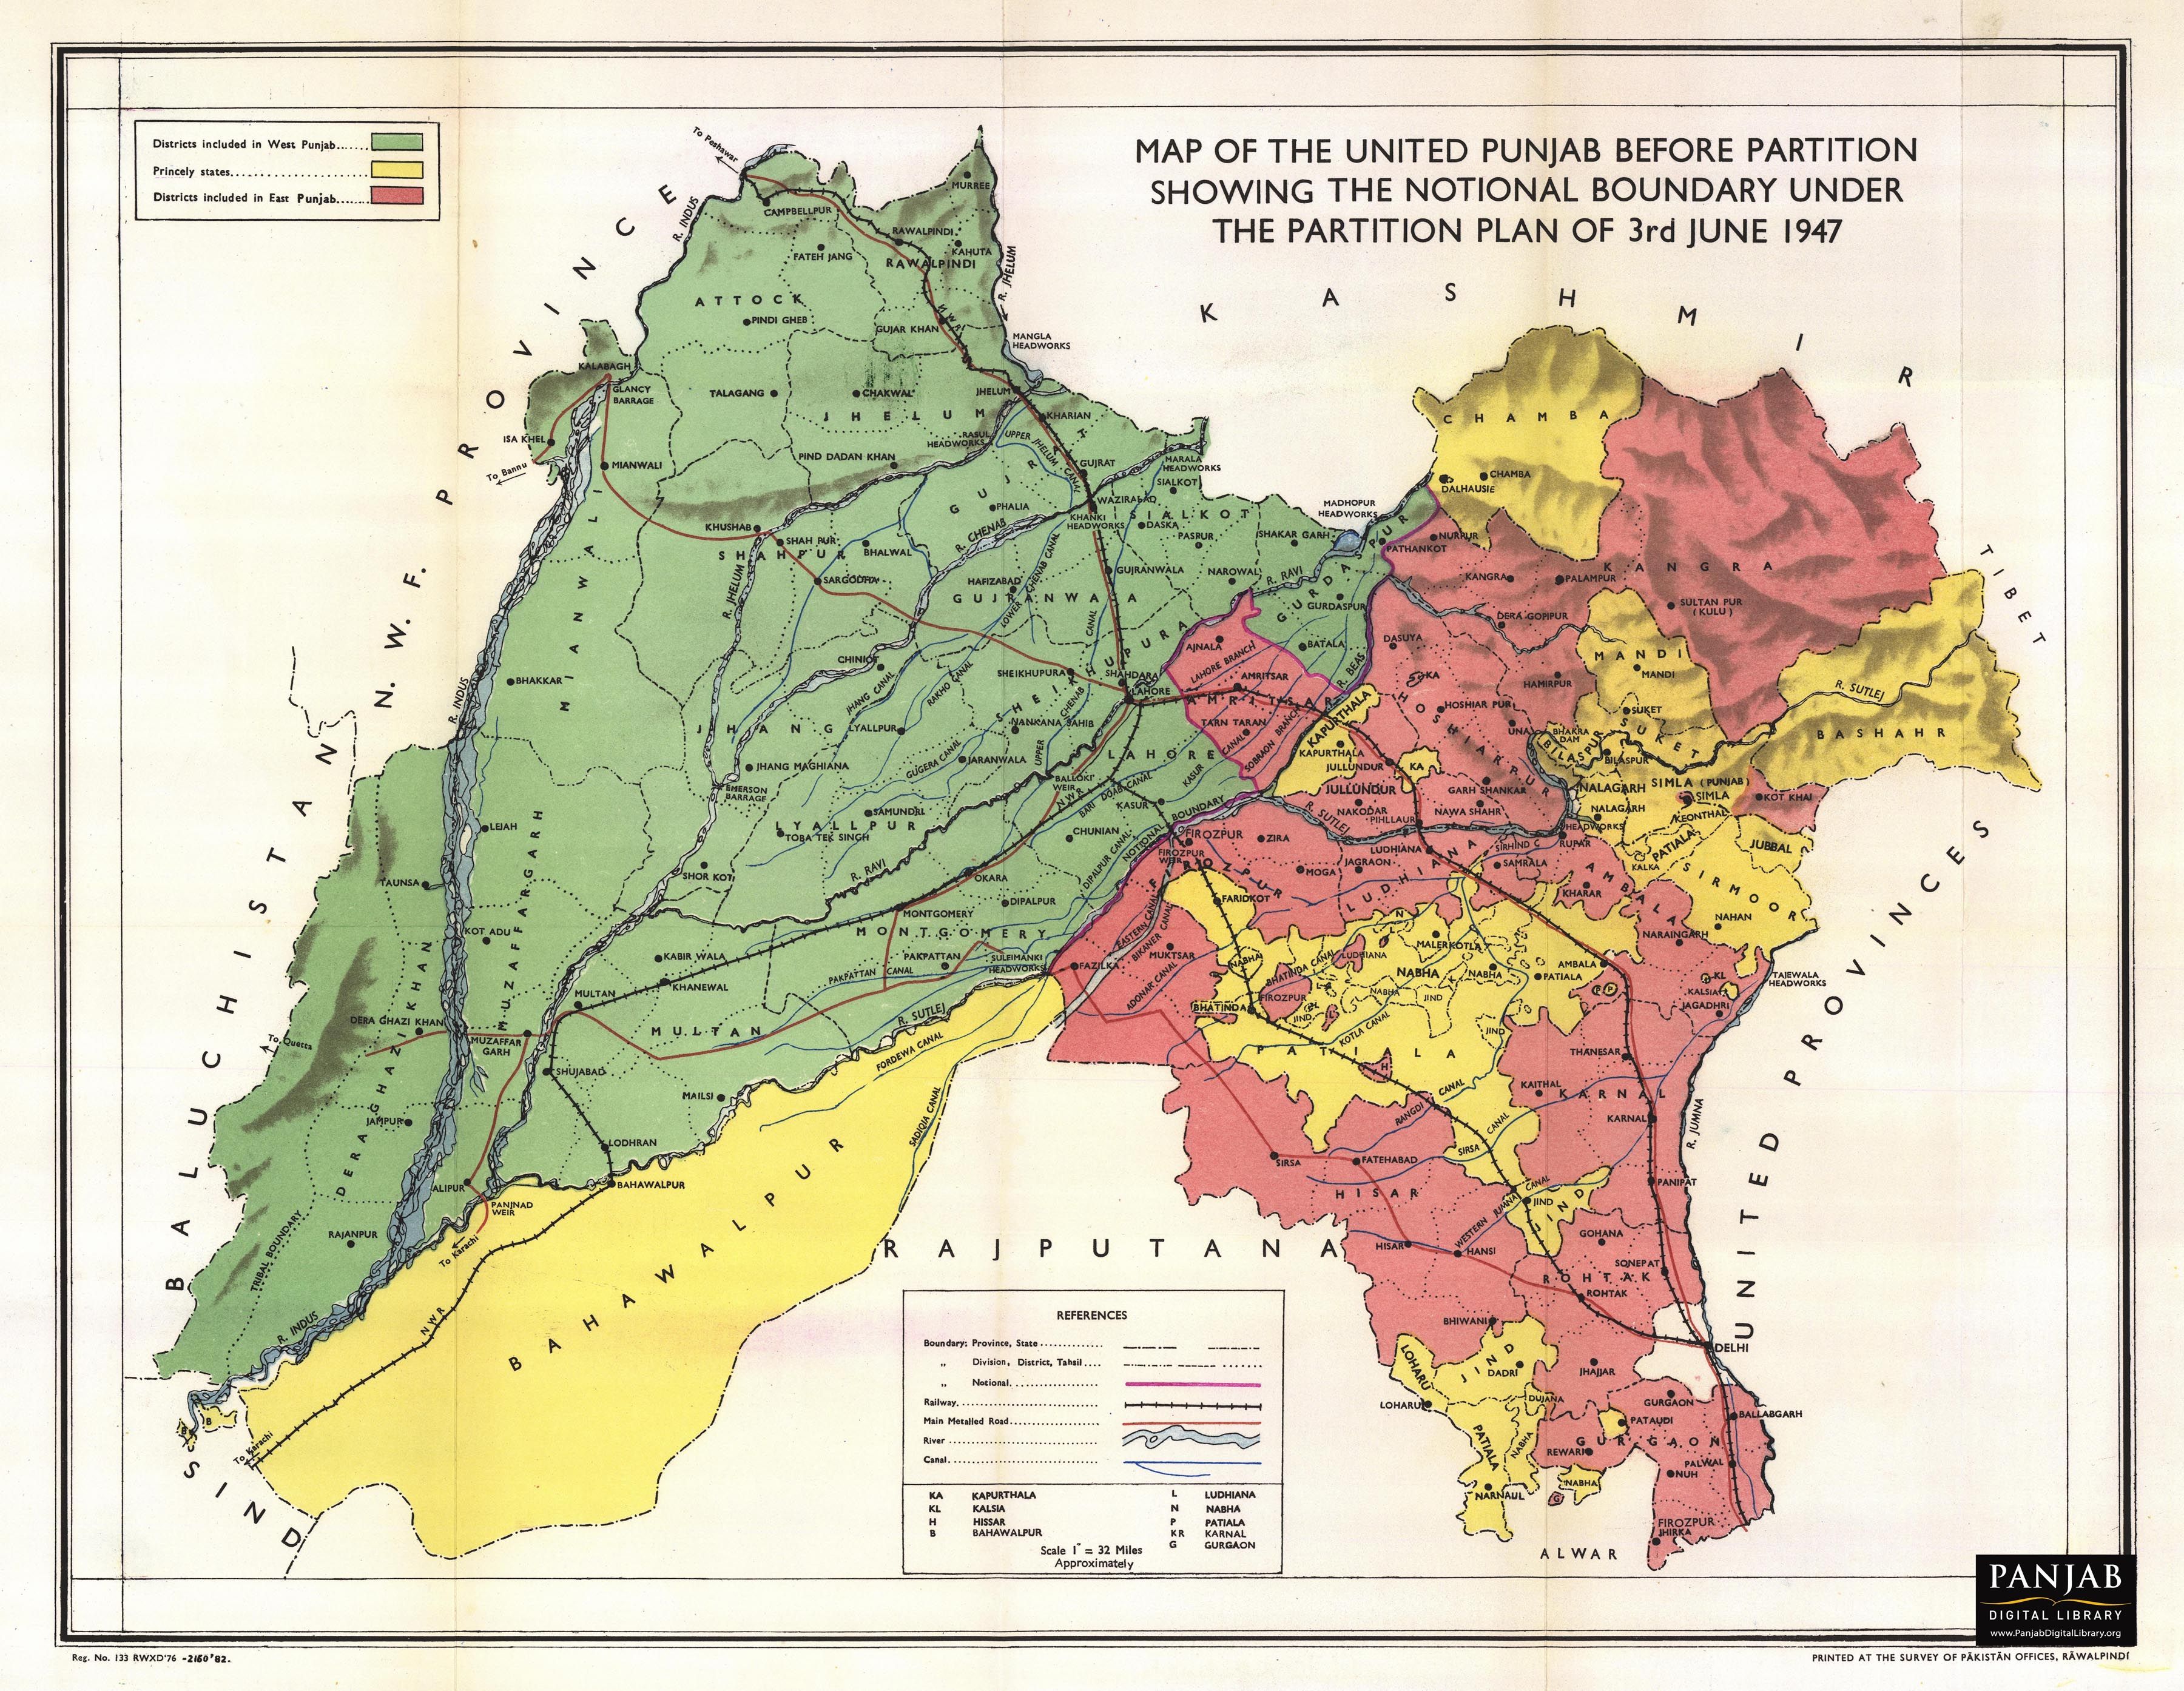 Partition Plan for Punjab Notional Boundary 3 June 1947. Punjab, History, Independence day history